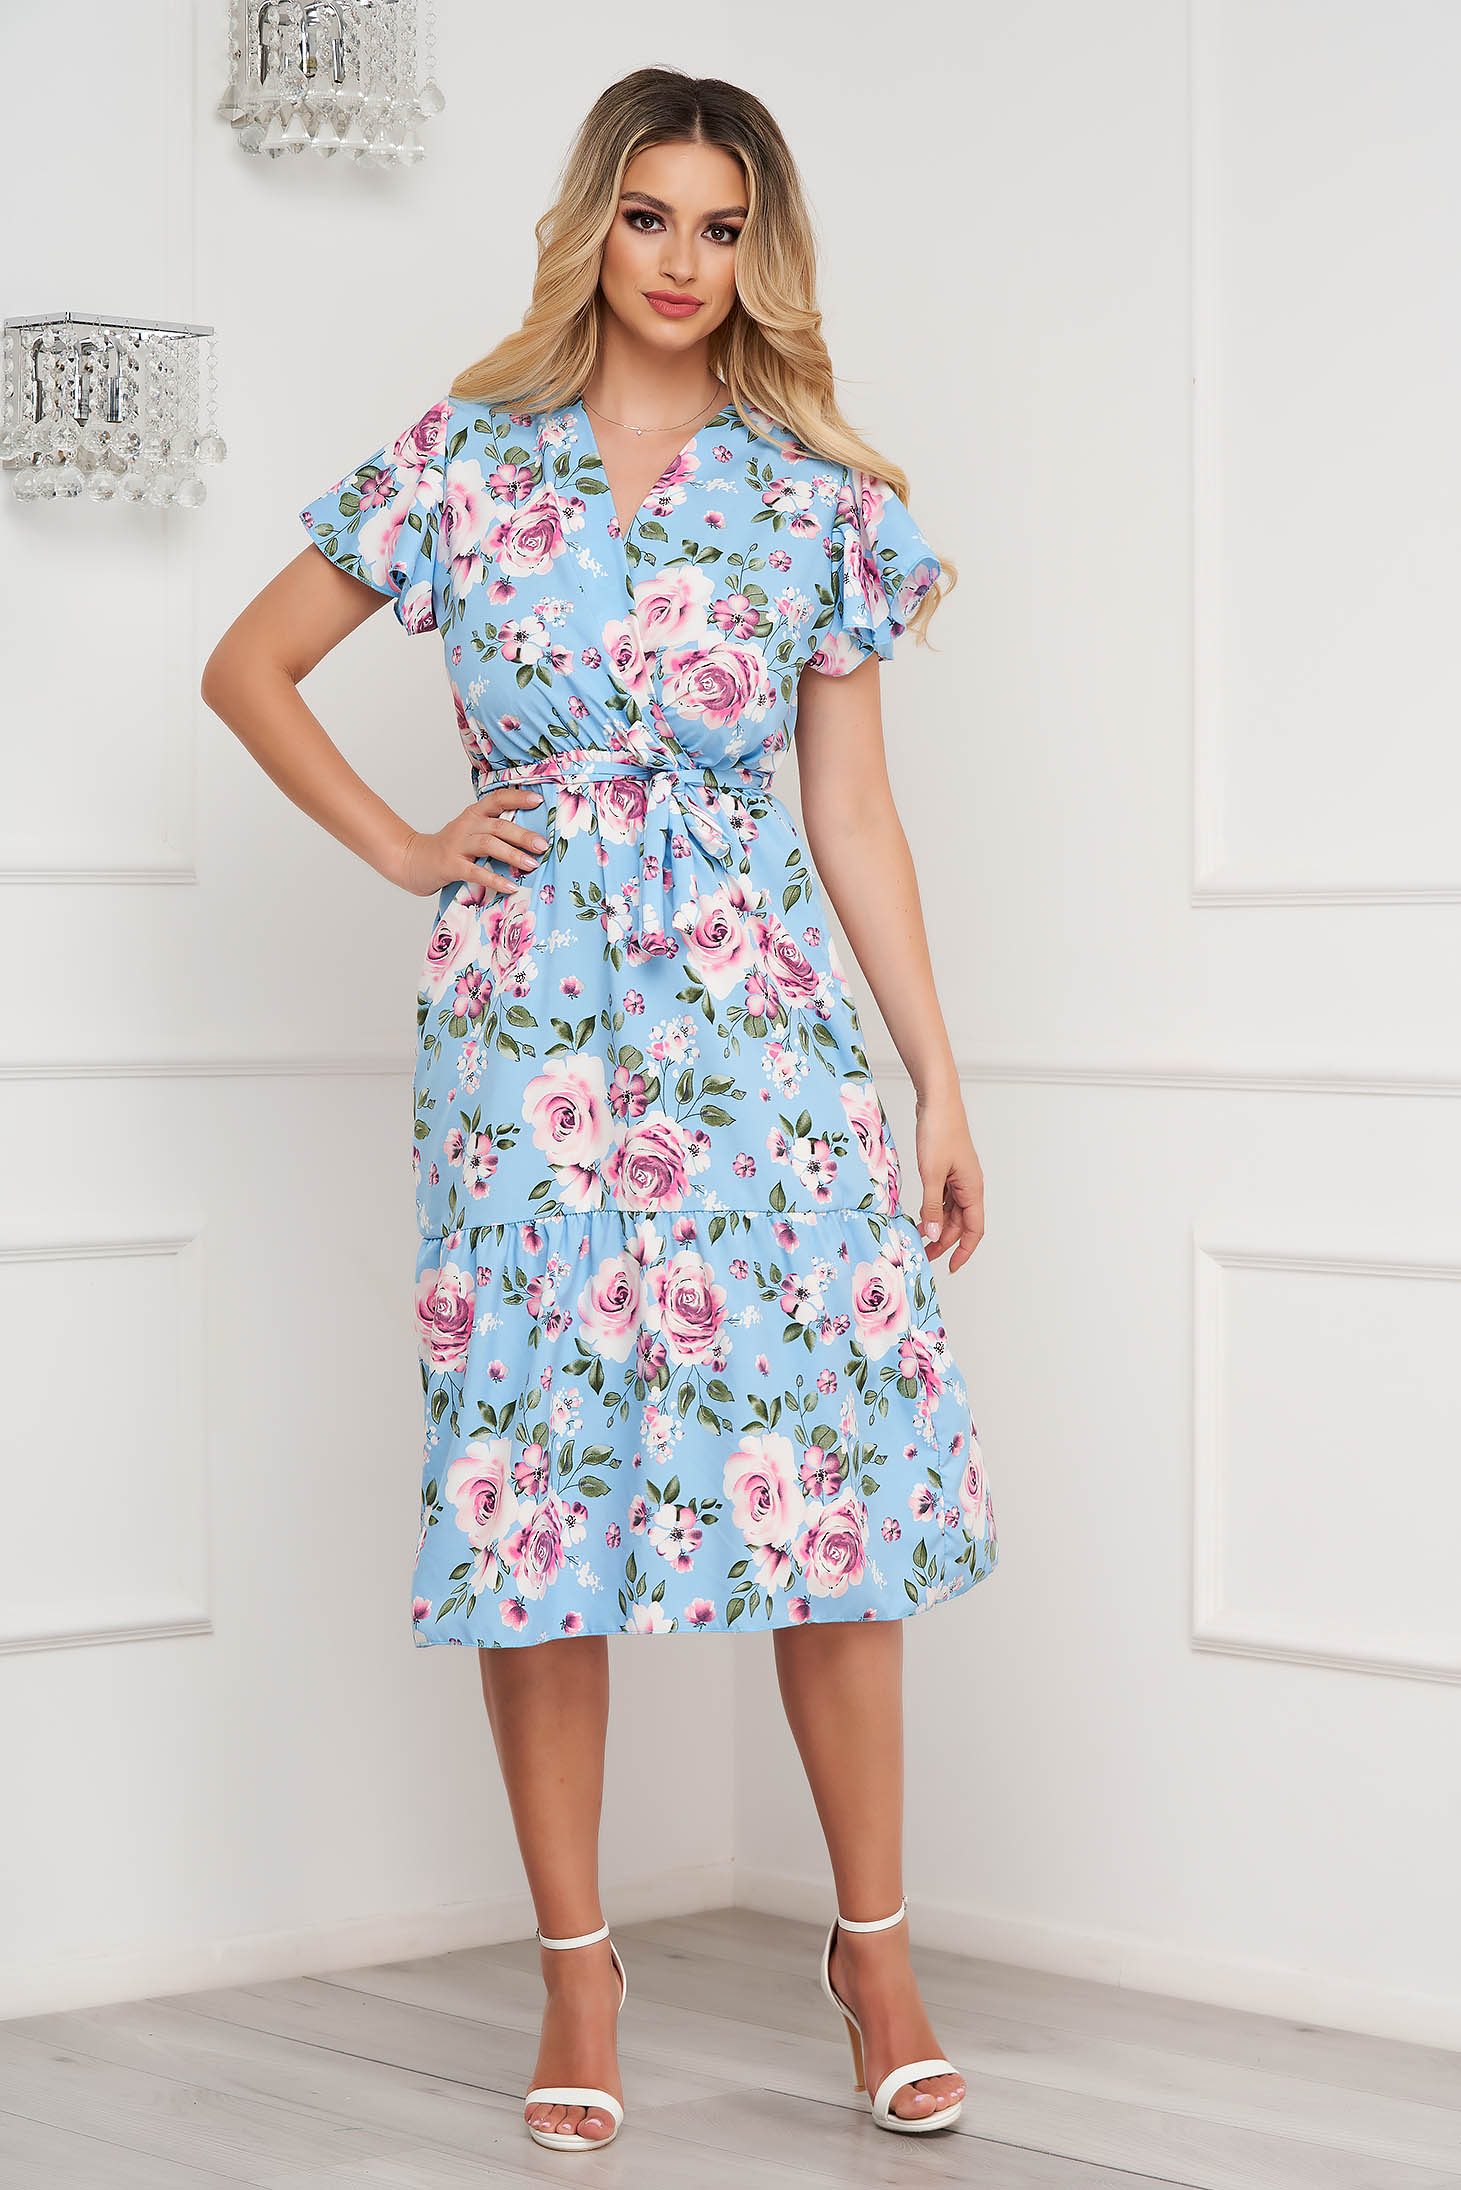 Dress georgette cloche with elastic waist with floral print midi